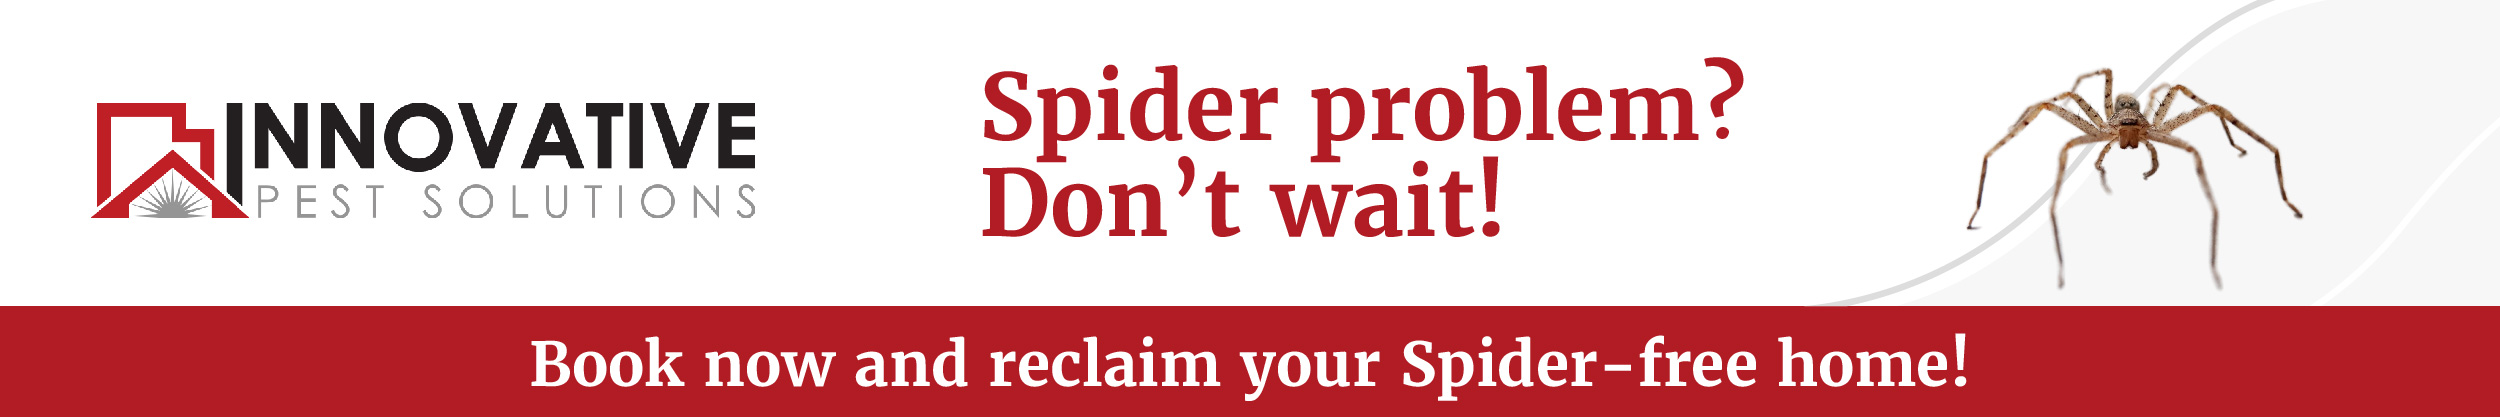 A CTA for spider control services